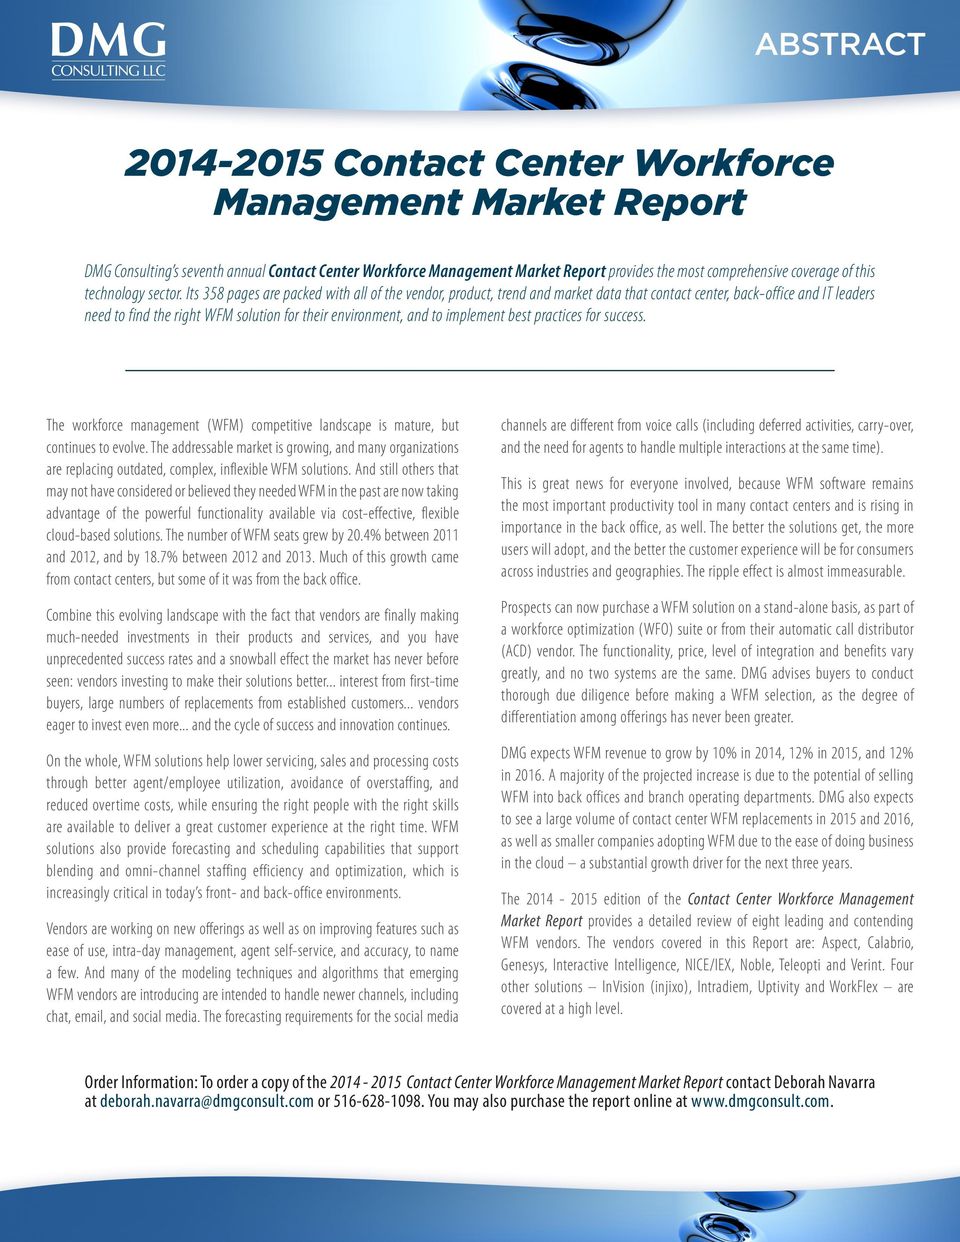 Its 358 pages are packed with all of the vendor, product, trend and market data that contact center, back-office and IT leaders need to find the right WFM solution for their environment, and to